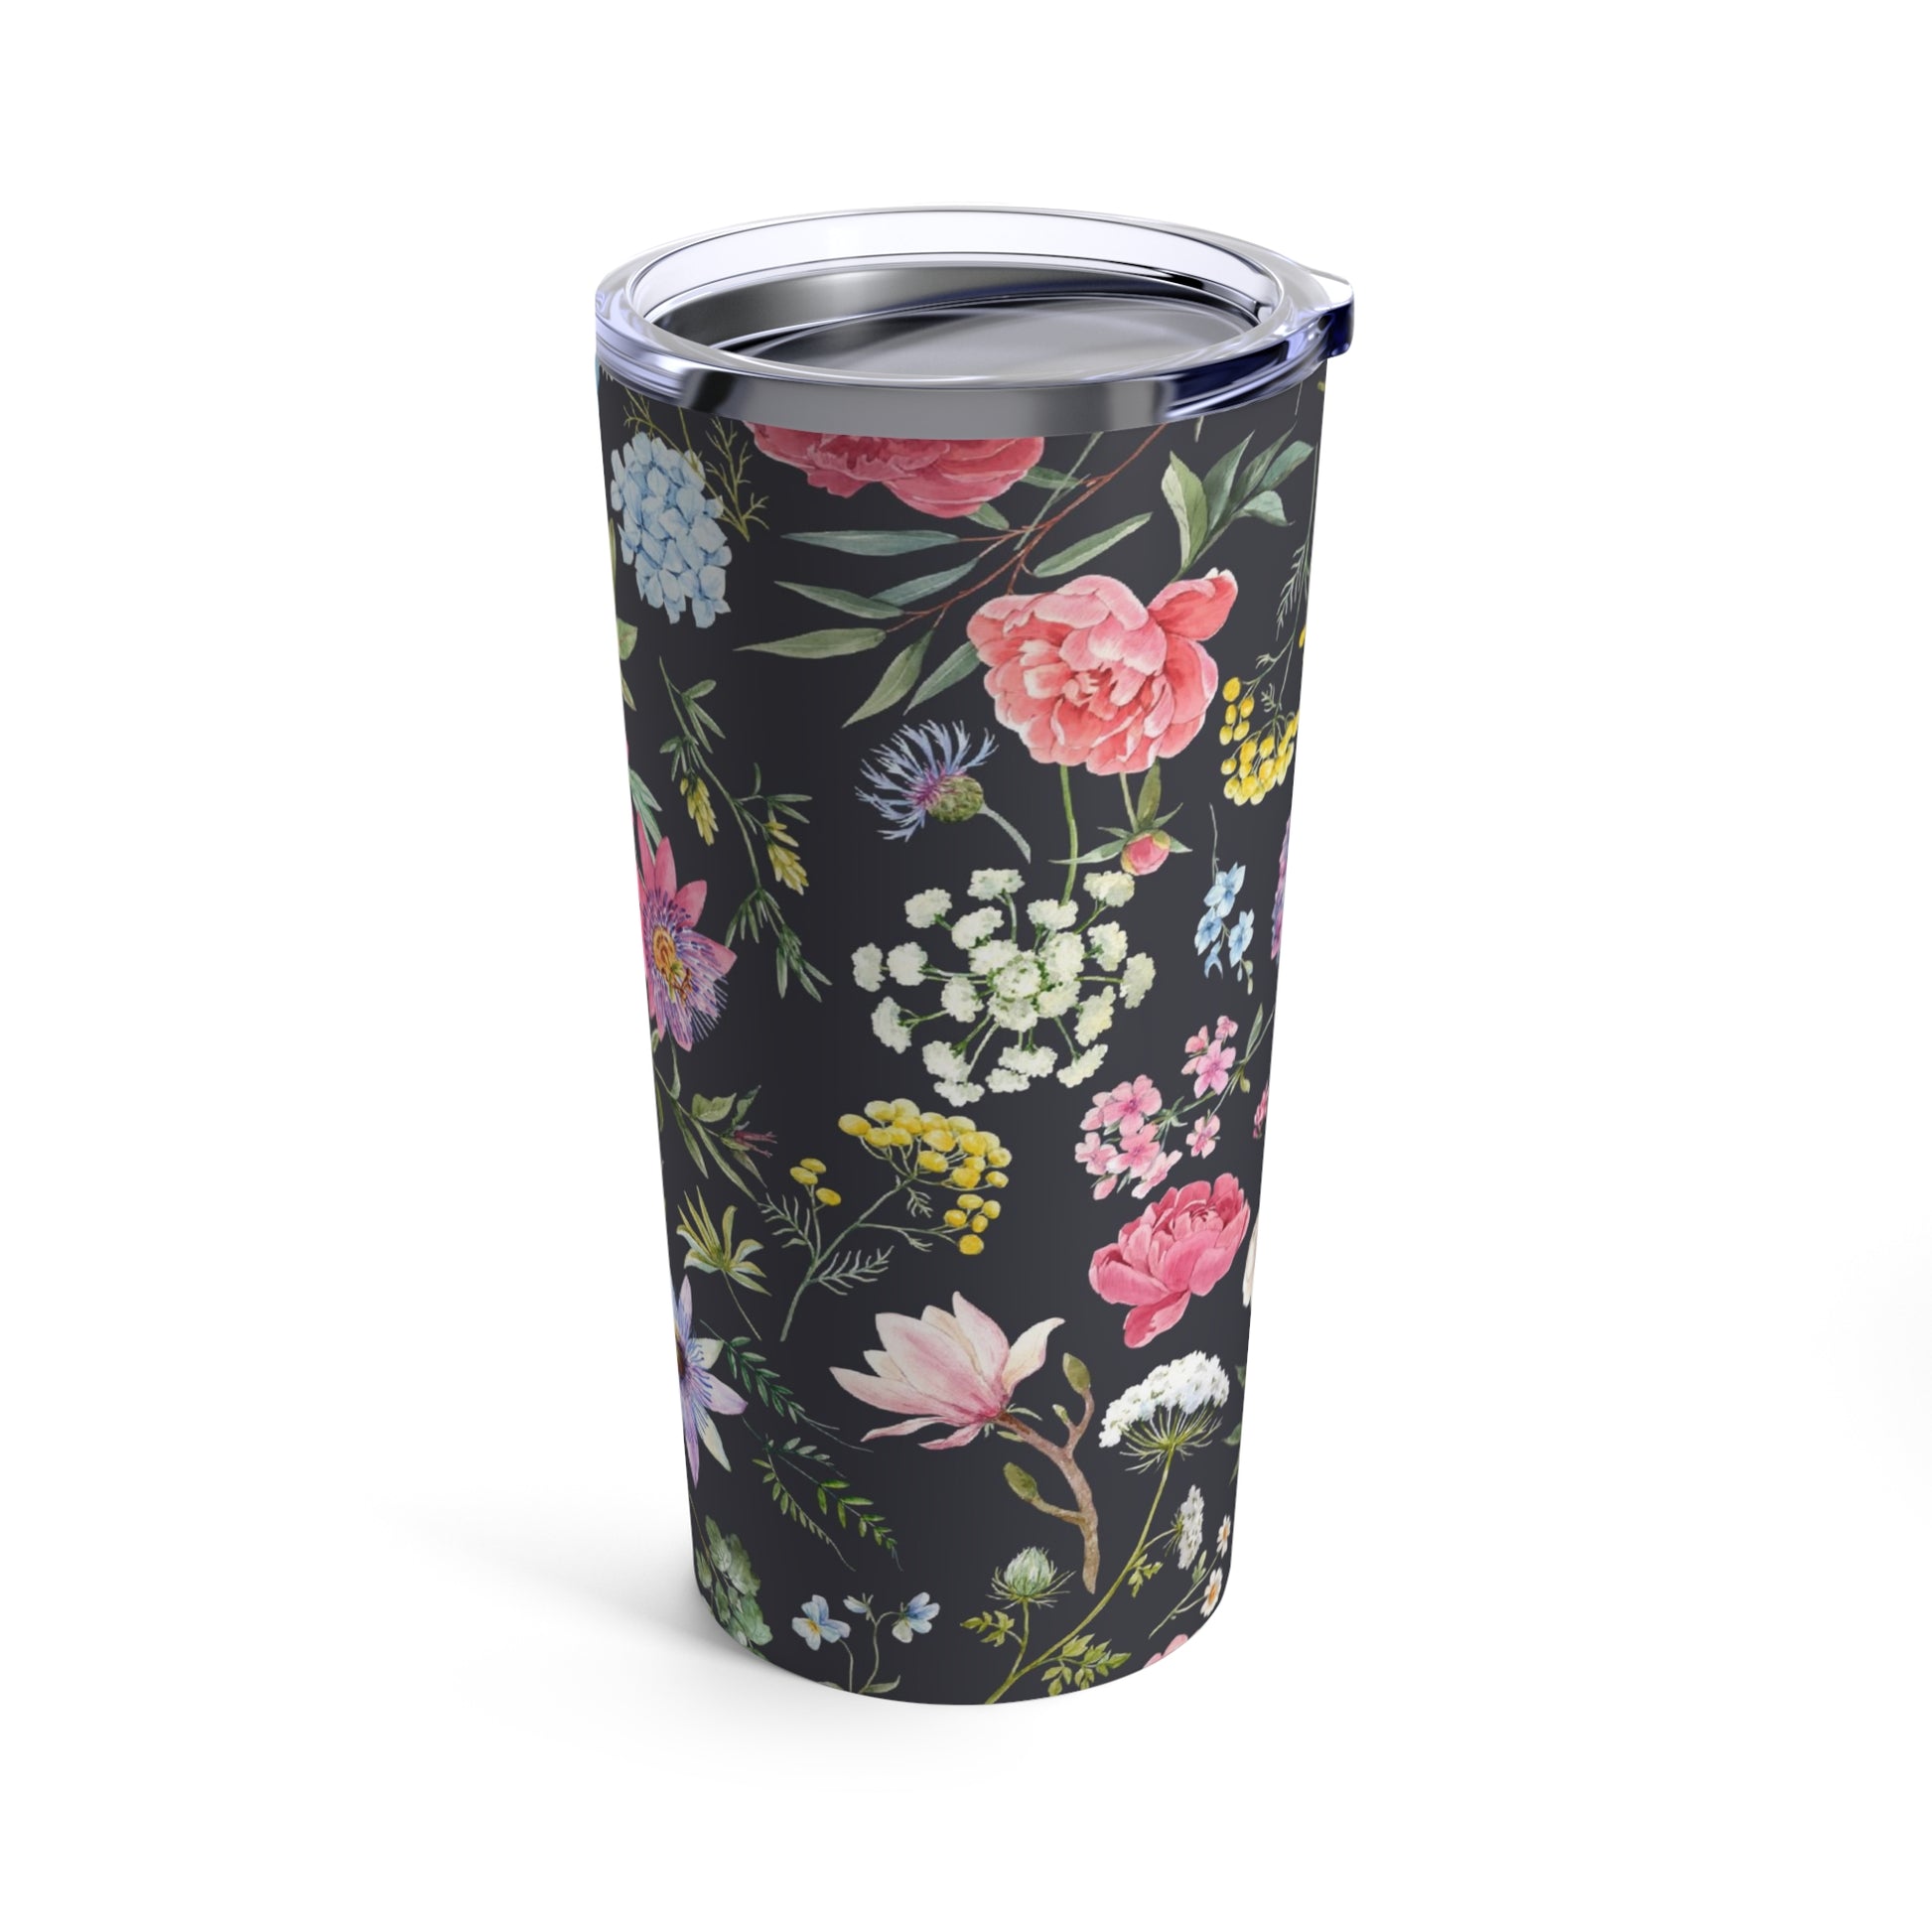 A black and white Flower Garden Tumbler: 20 oz., Stainless steel; Insulated cup with flowers on it, dishwasher safe. (Printify)